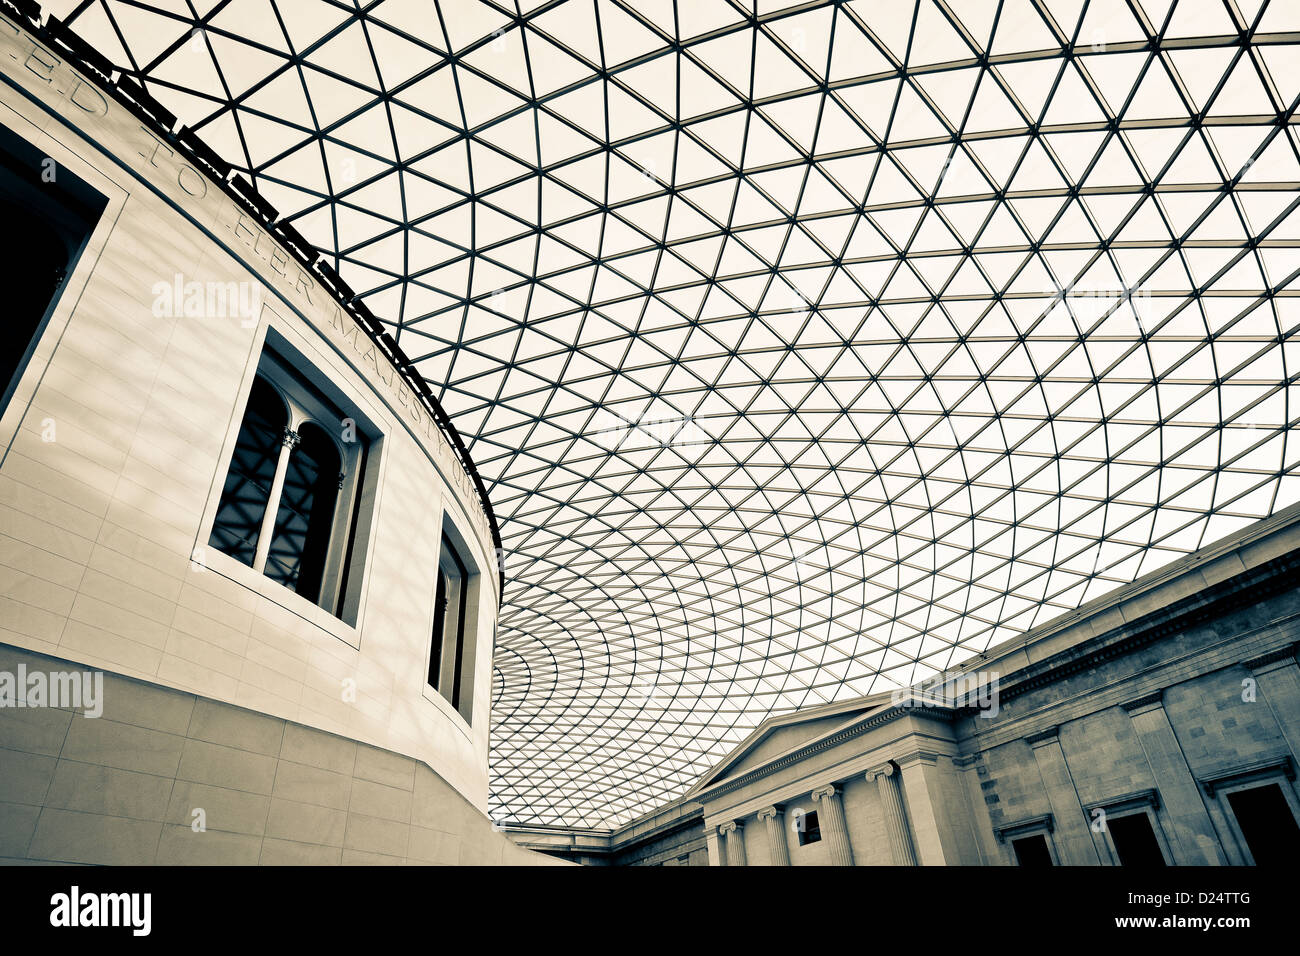 The Great court, The British Museum, Great Russell Street, London, England Stock Photo